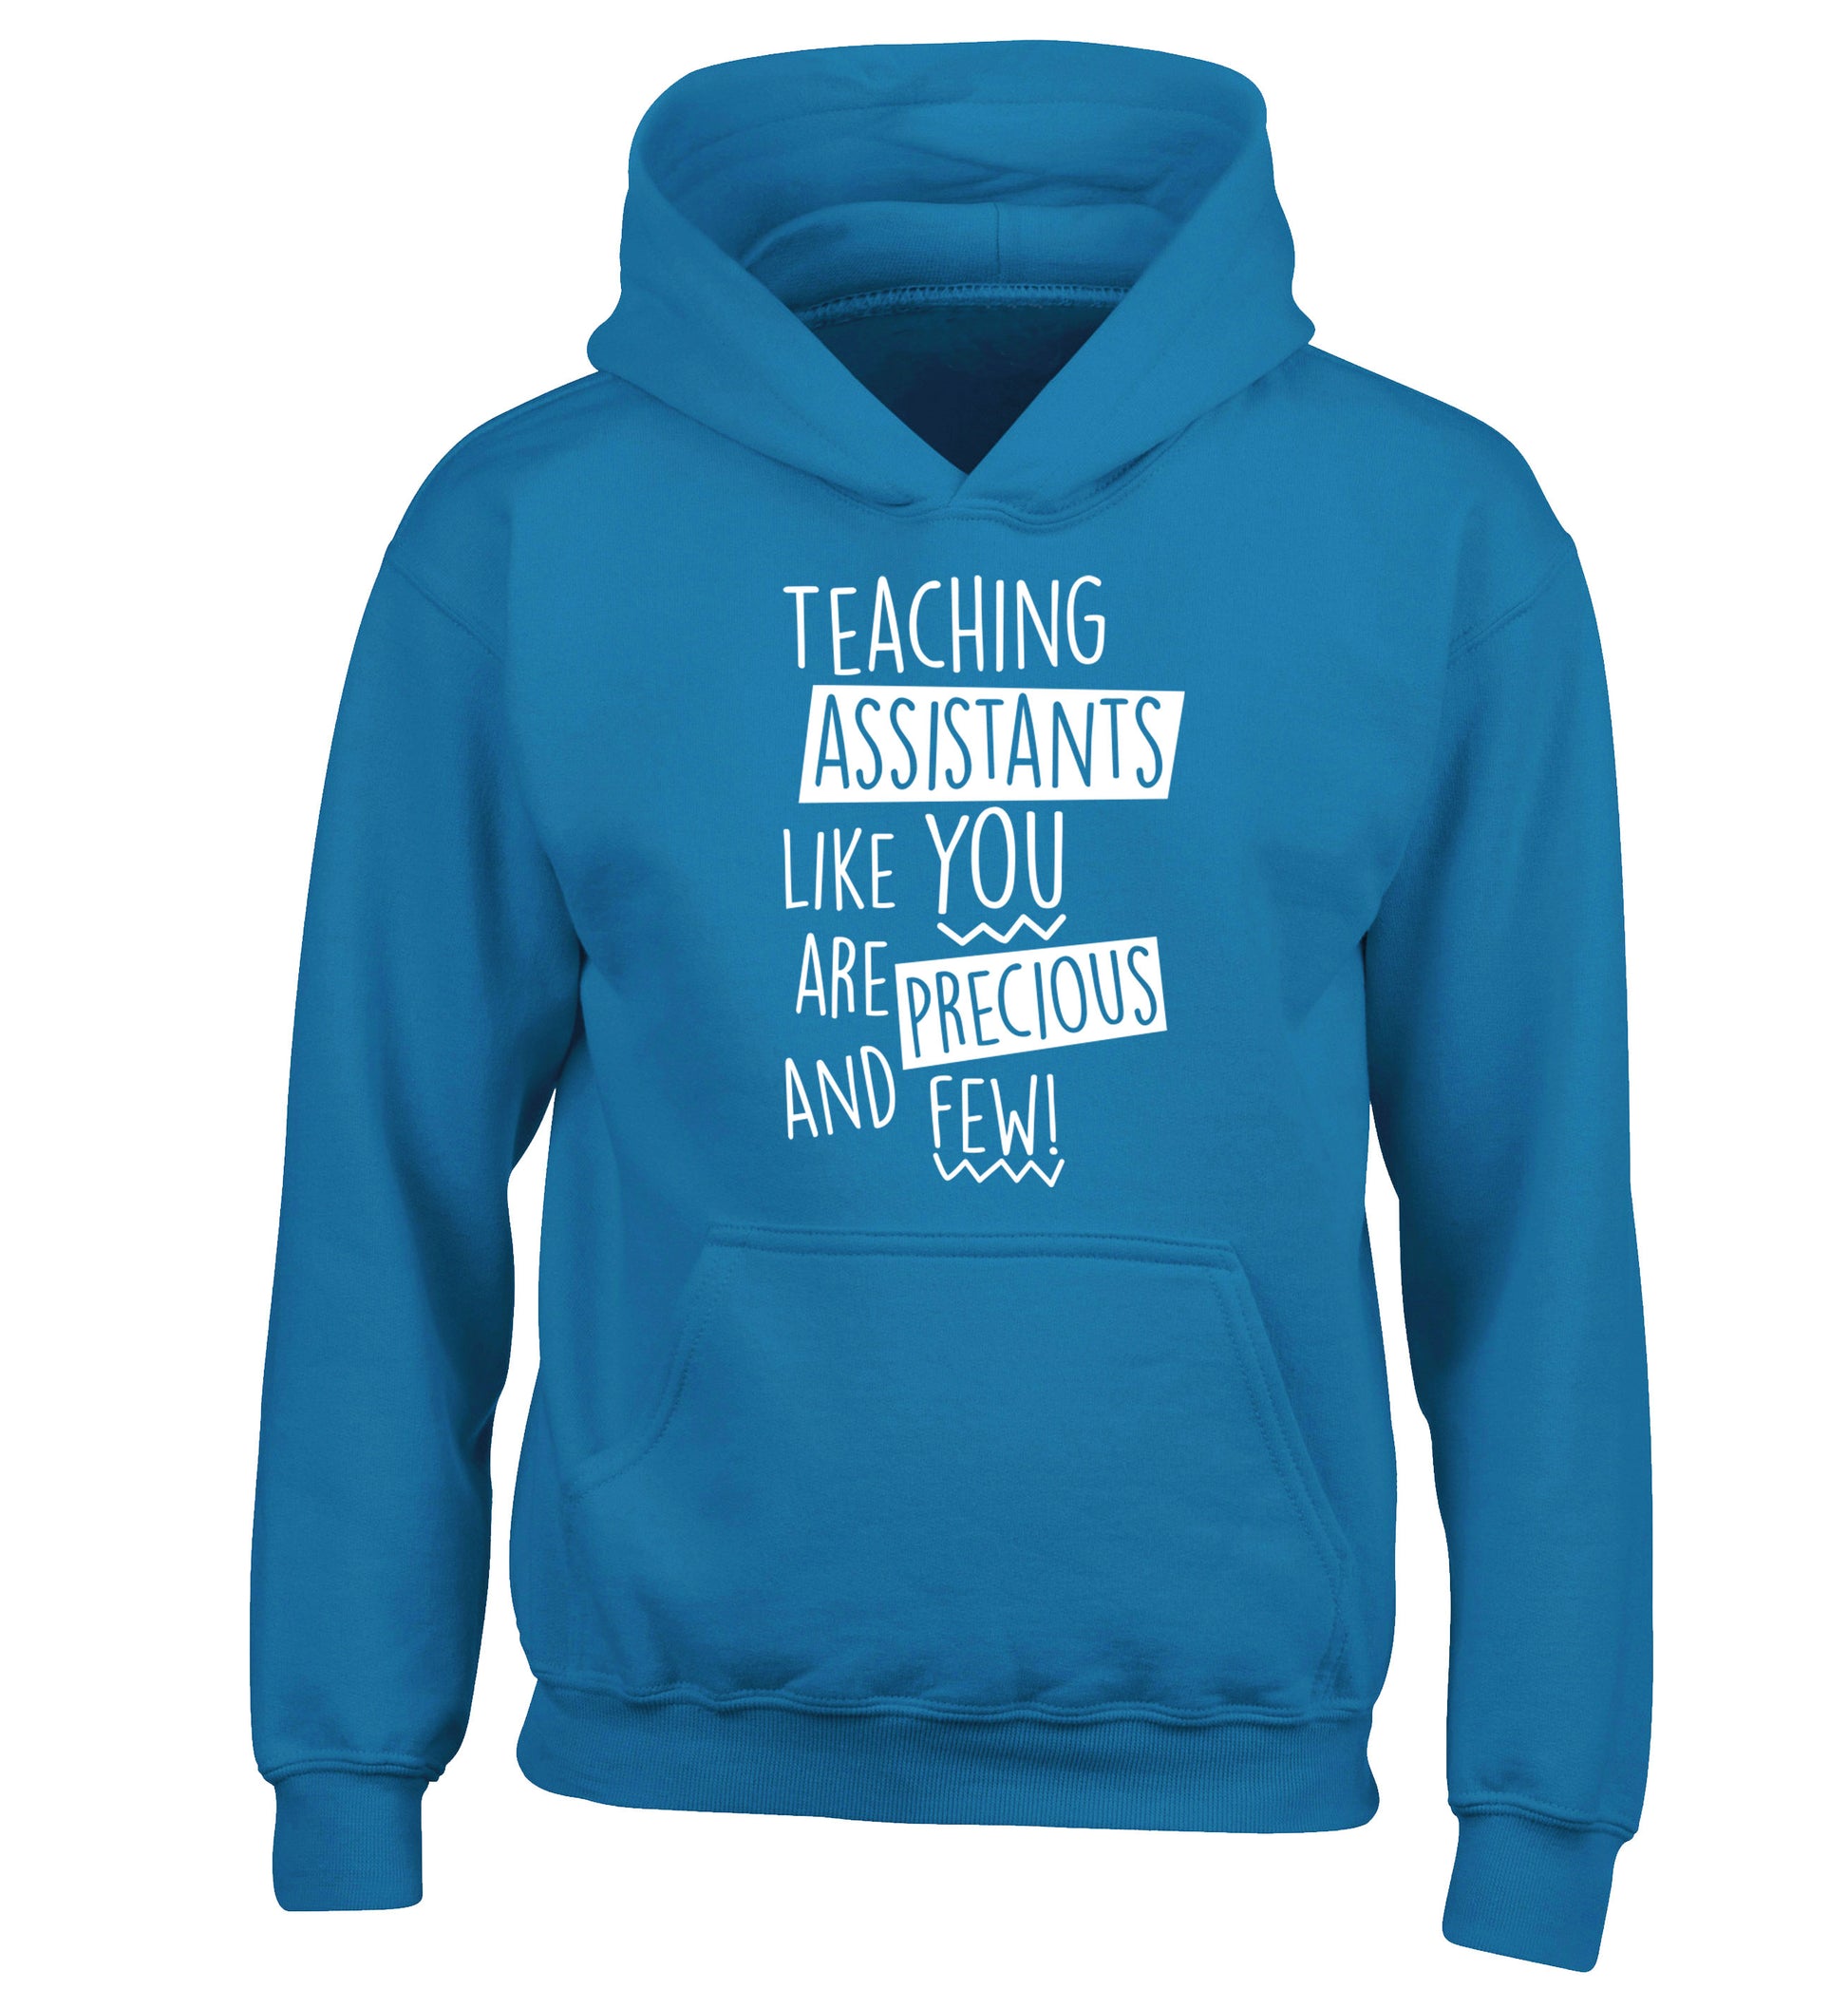 Teaching assistants like you are previous and few! children's blue hoodie 12-14 Years